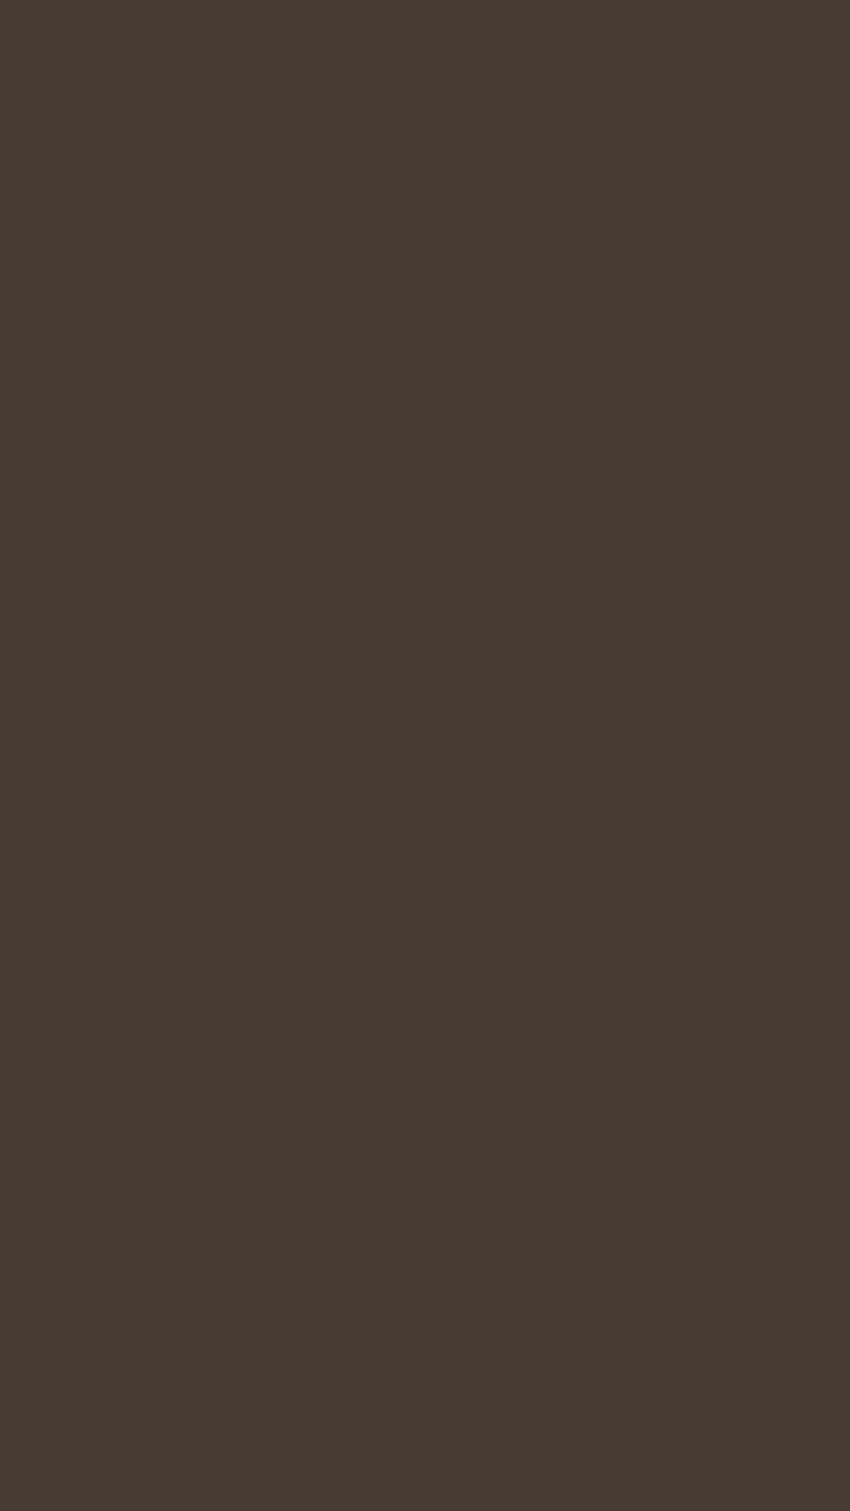 Taupe Solid Color Background for Mobile Phone, Solid Brown HD phone wallpaper